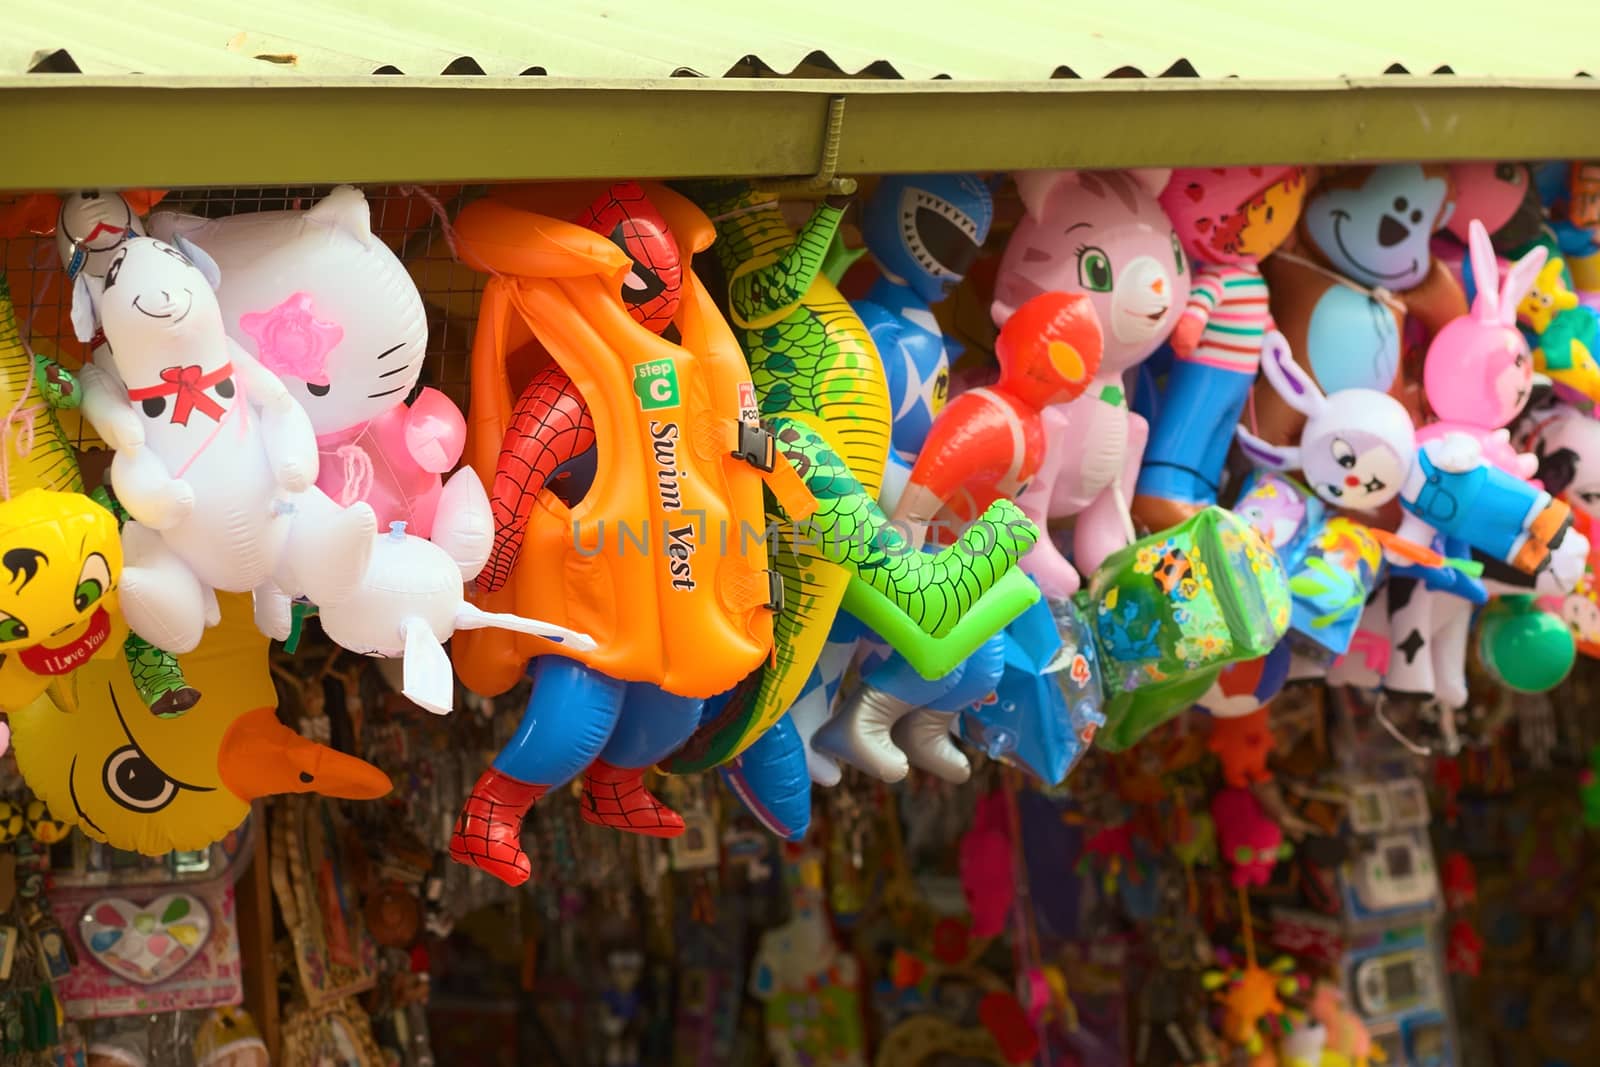 BANOS, ECUADOR - FEBRUARY 22, 2014: Floaties, such as water wings, life vest and inflatable animals and figures hanging at a toy stand at the Sebastian Acosta Park on February 22, 2014 in Banos, Ecuador.